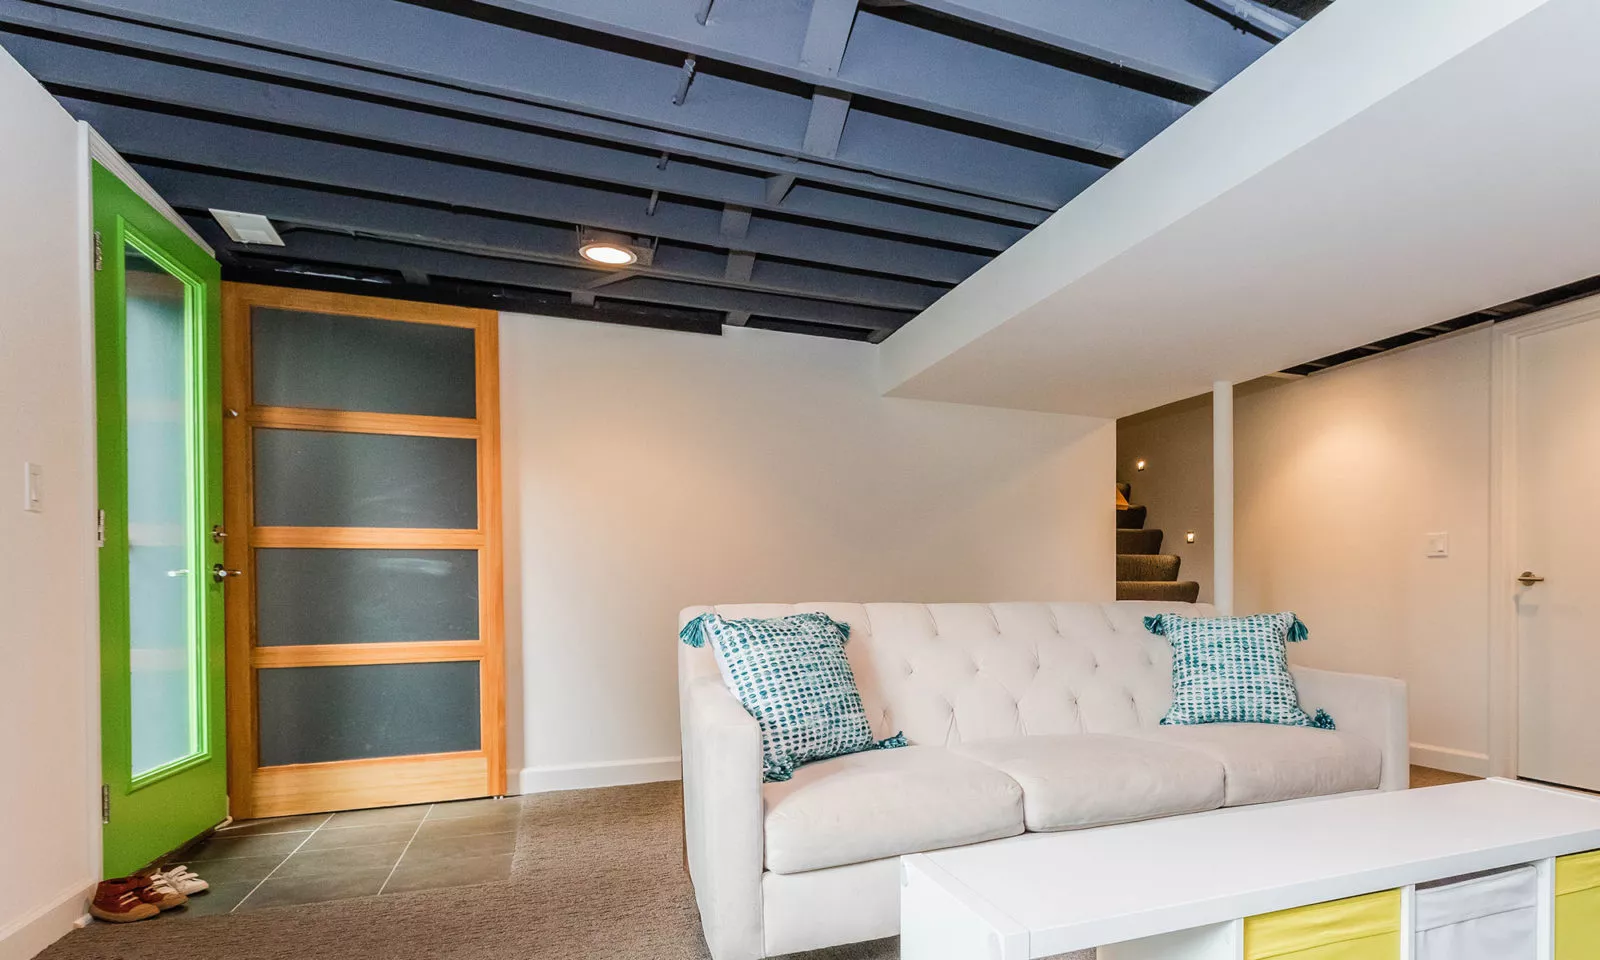 mid century modern ranch renovation and remodel view of finished basement with black painted exposed ceiling joists